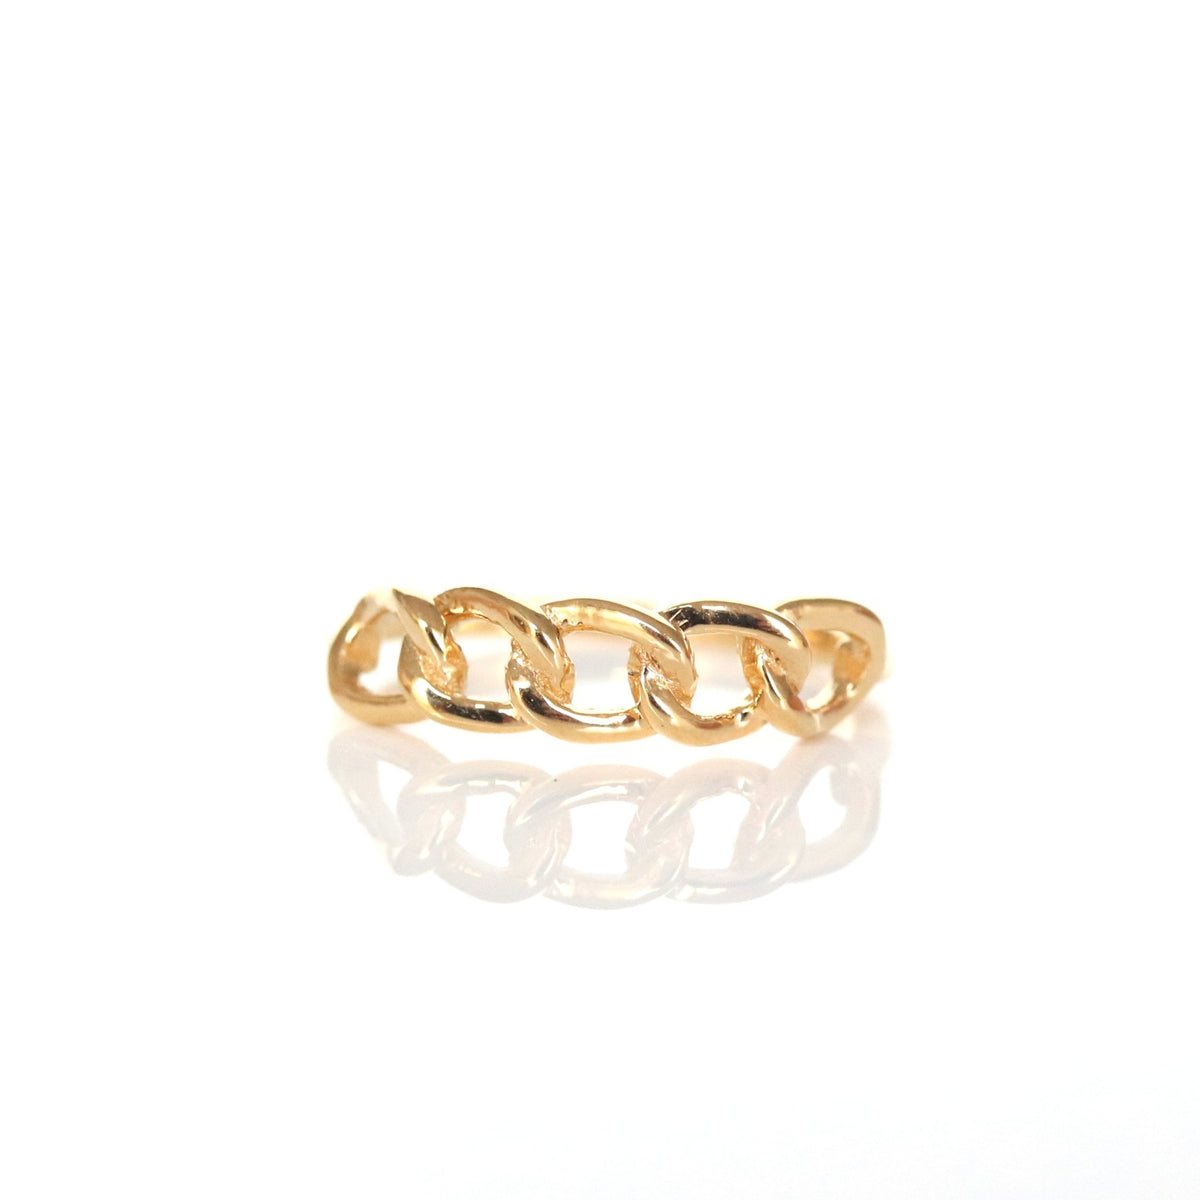 POISE CABLE LINK RING - GOLD - SO PRETTY CARA COTTER